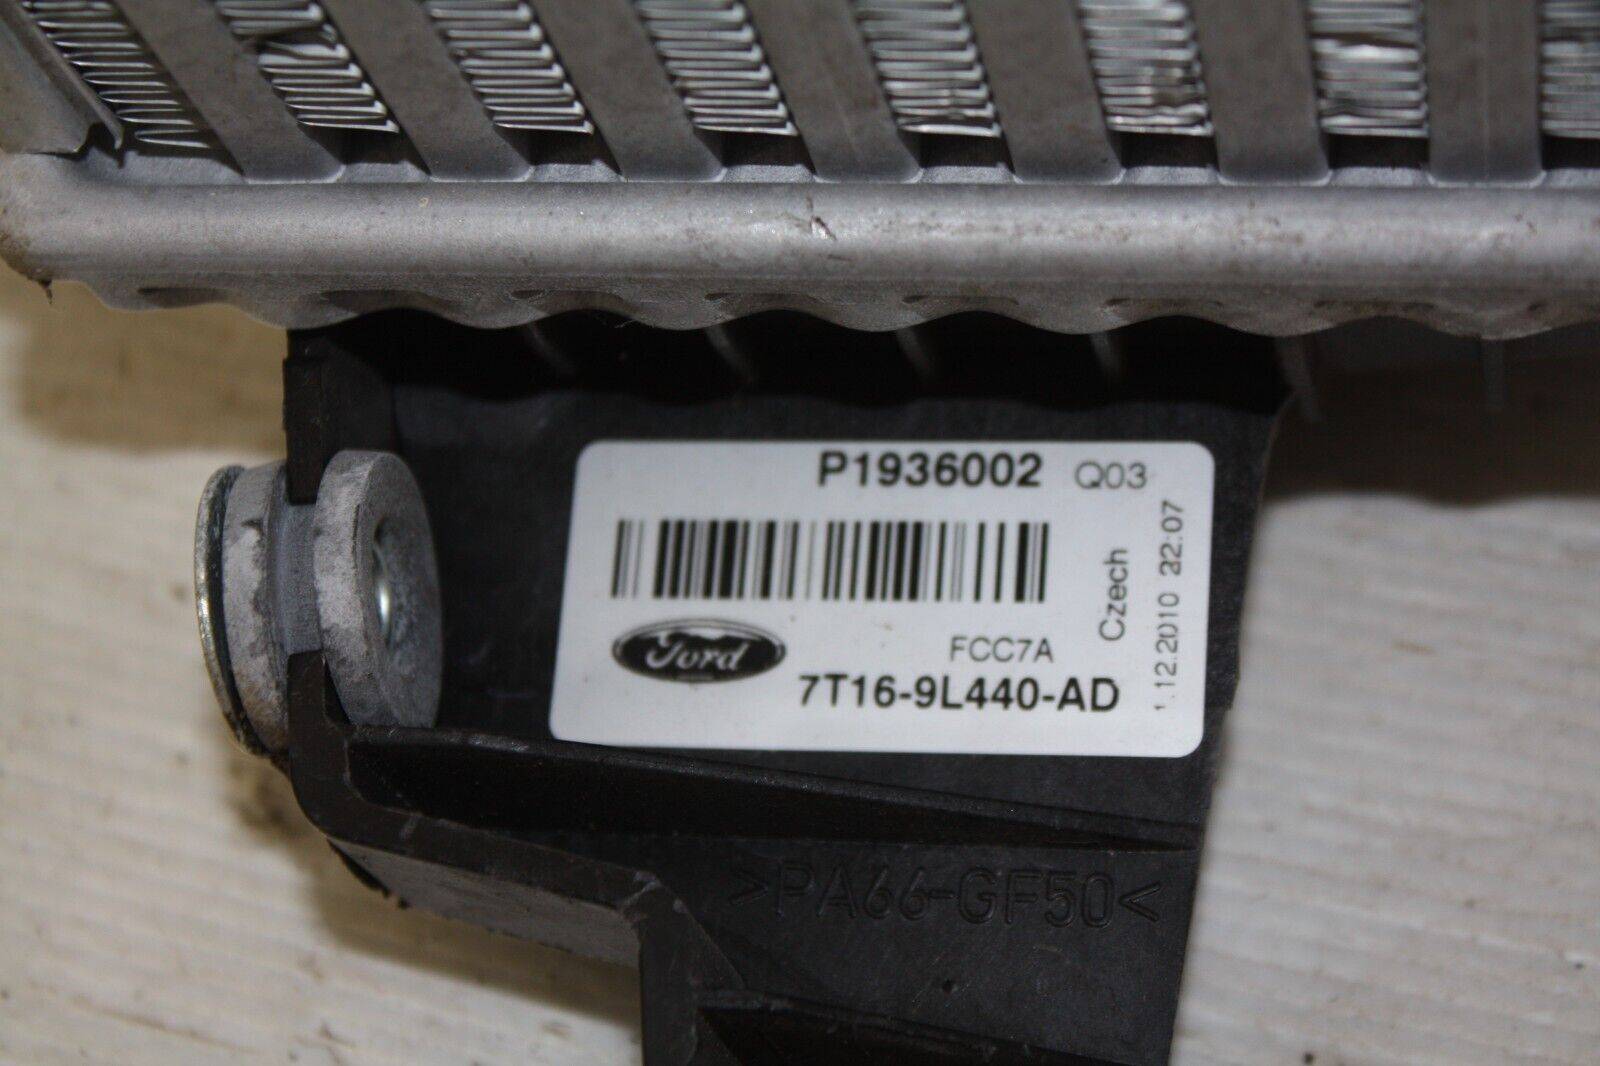 Ford-Transit-Connect-Cooling-Radiator-7T16-9L440-AD-Genuine-176105939792-16